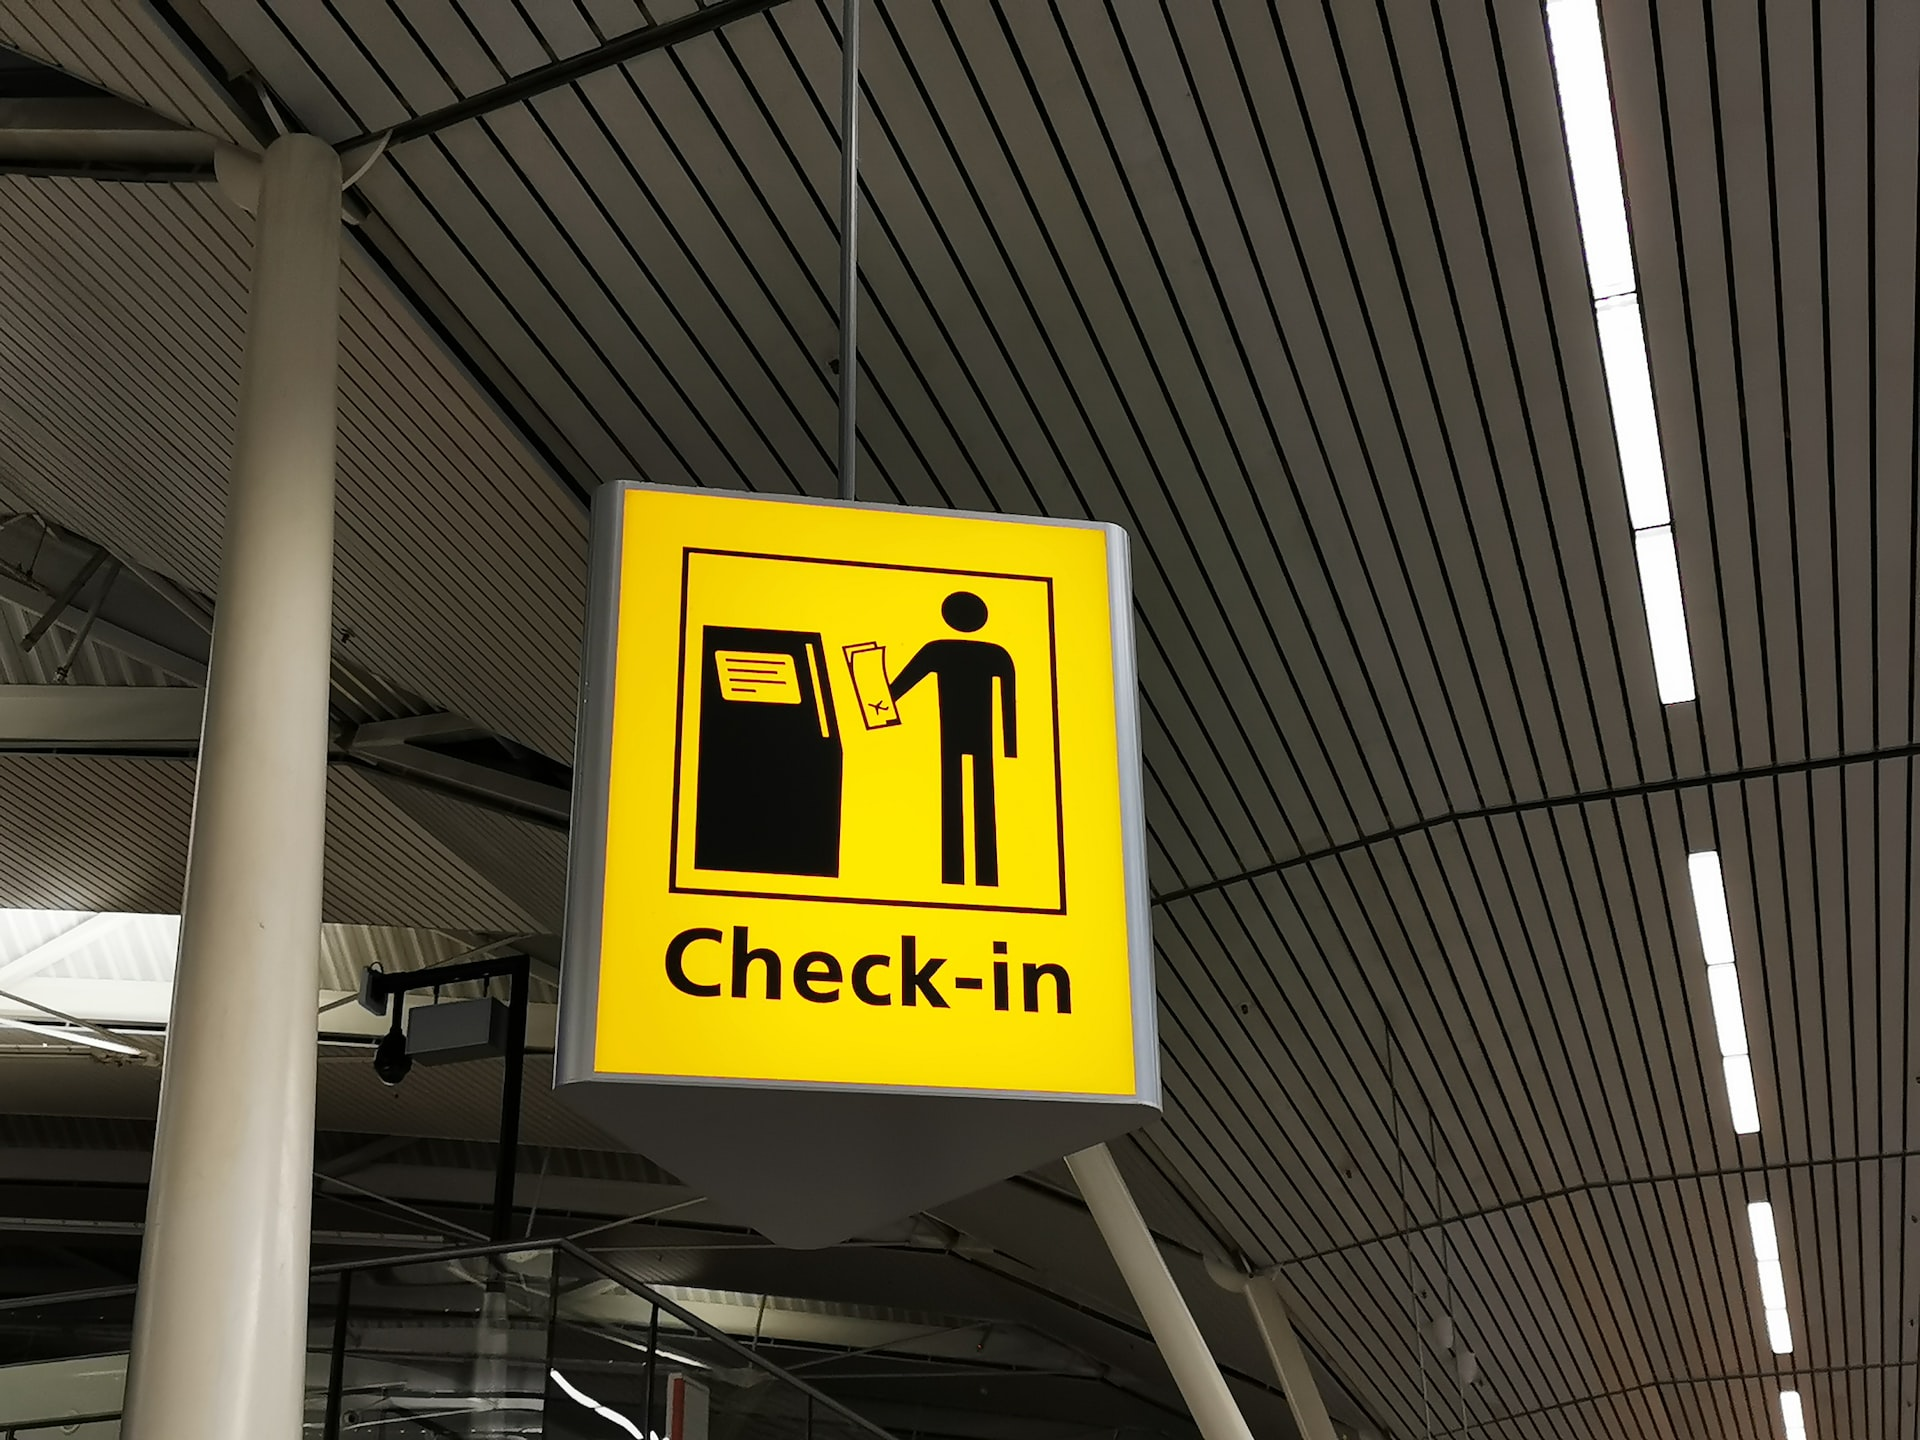 A check-in desk sign at an airport.